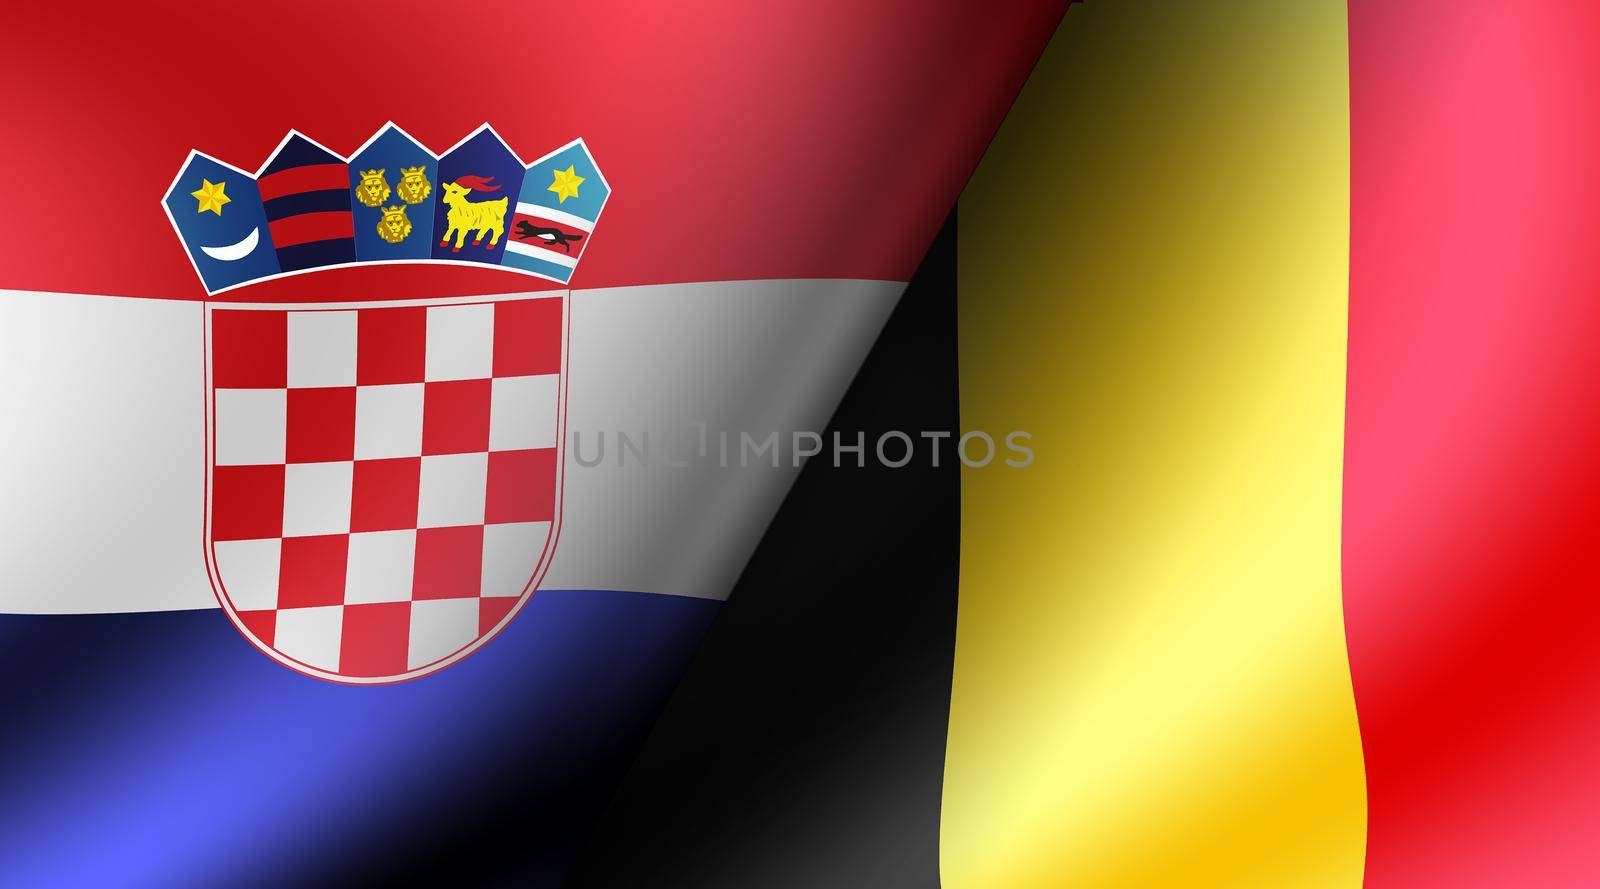 Football 2022 | Group Stage Match Cards ( Croatia VS Belgium ) by barks